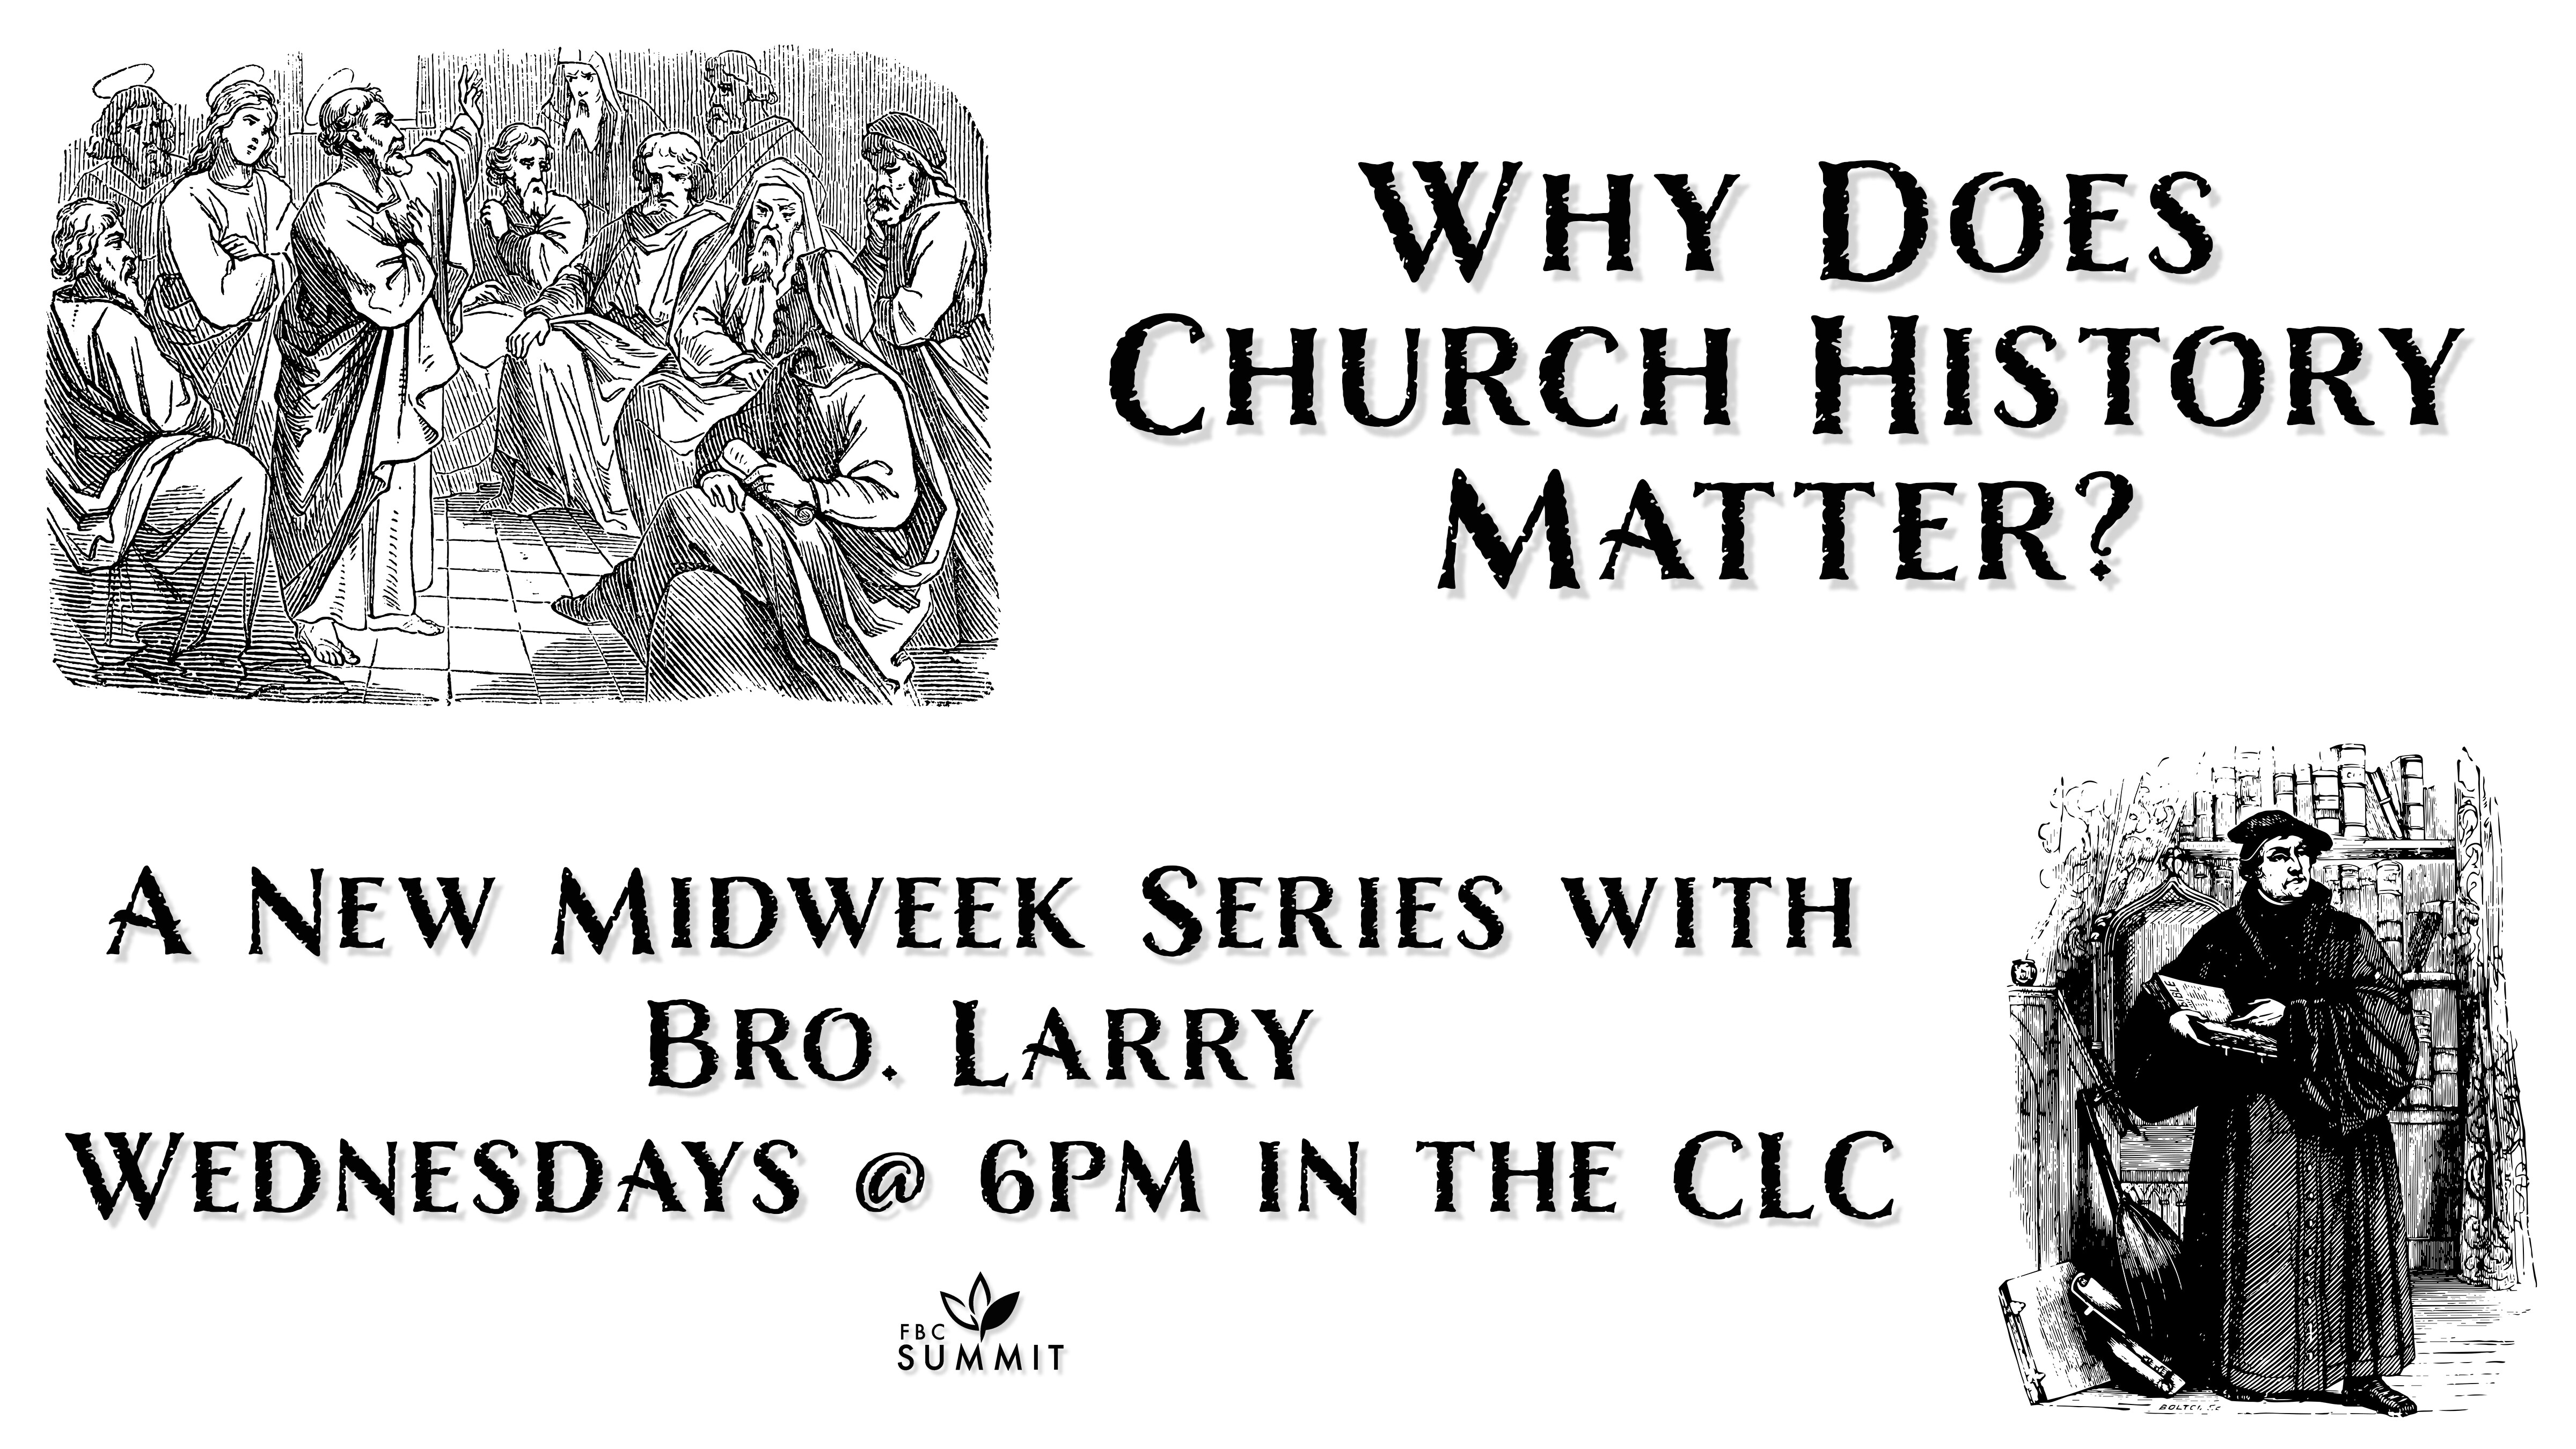 Midweek Bible Study: "Church History 101: The First & Second Centuries" // Dr. Larry LeBlanc